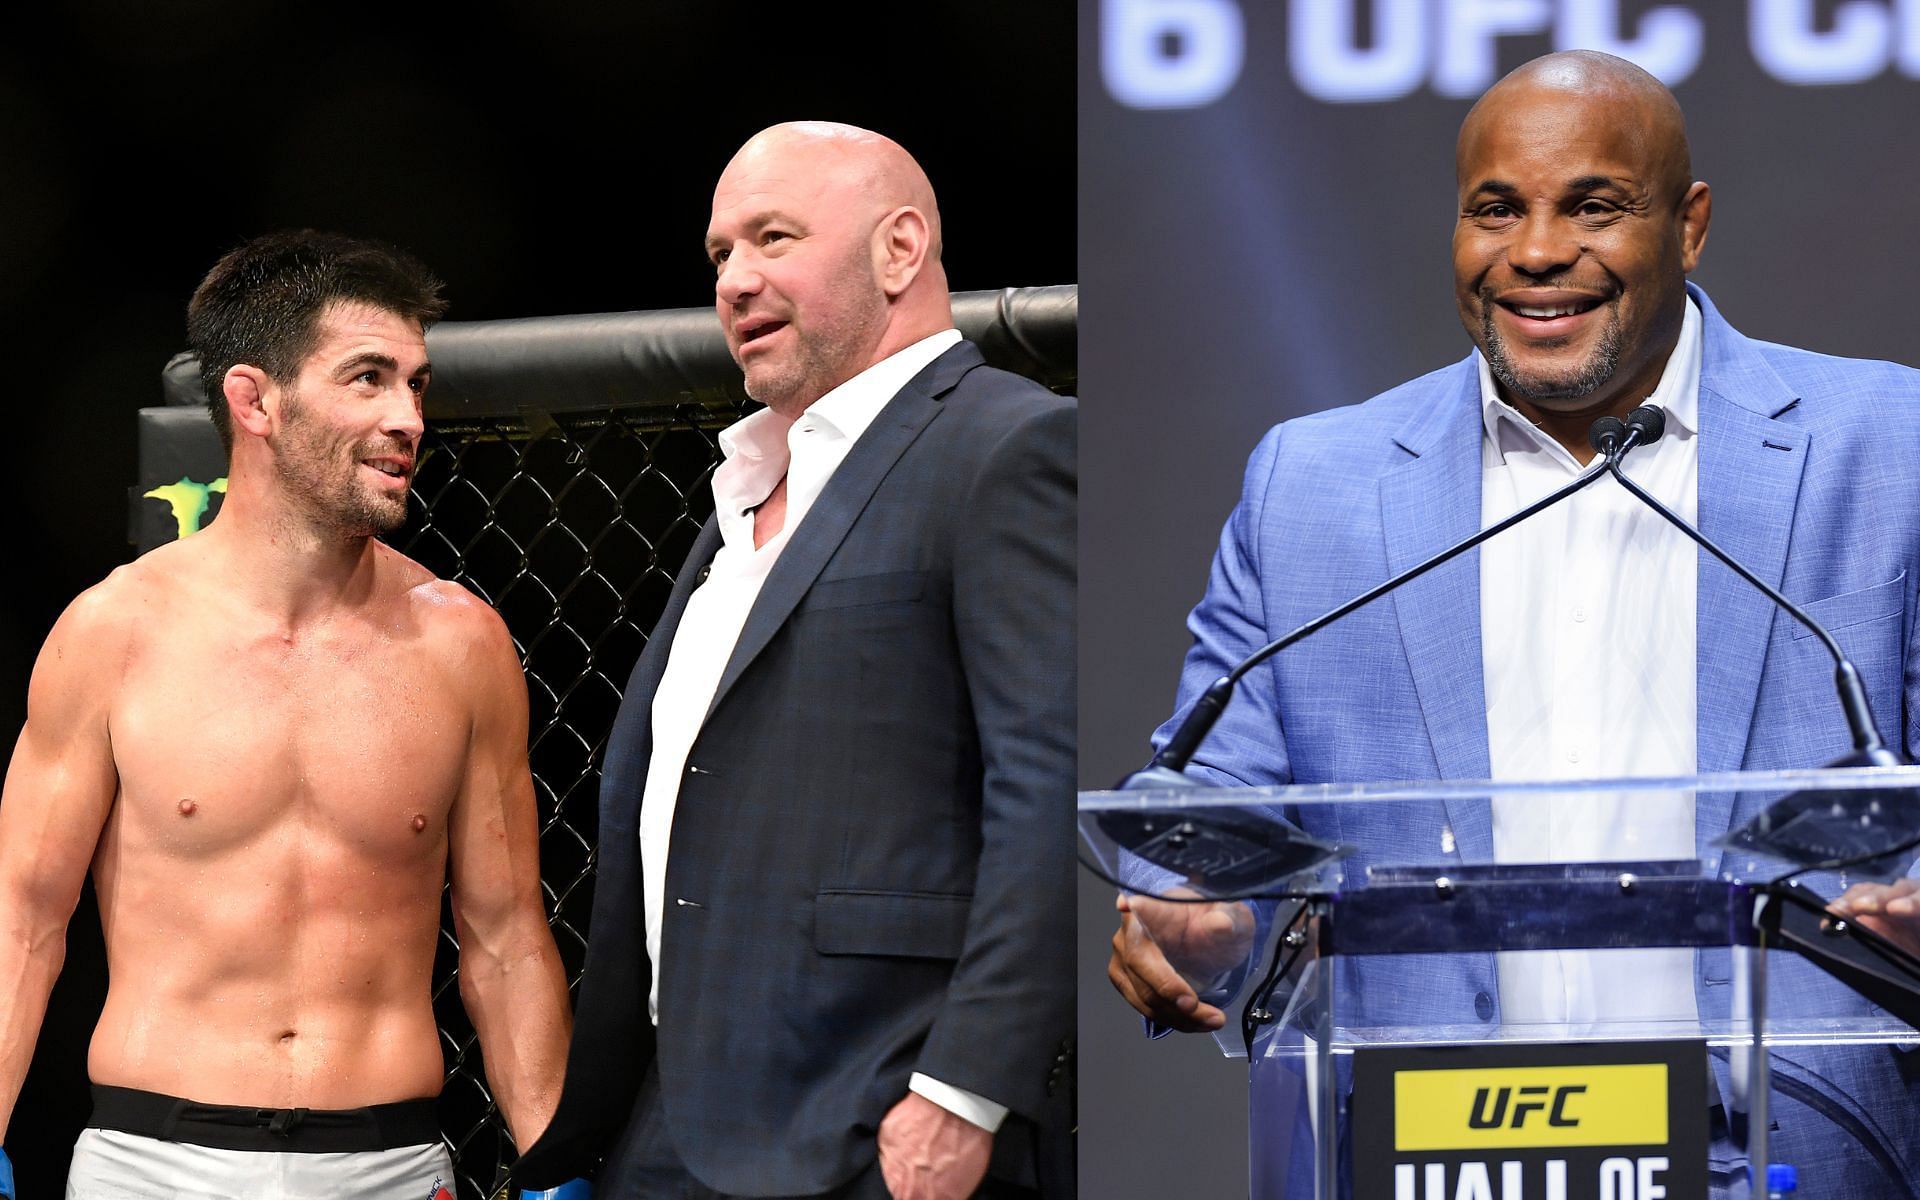 Dominick Cruz and Dana White (left), and Daniel Cormier (right). [Images courtesy: all images from Getty Images]